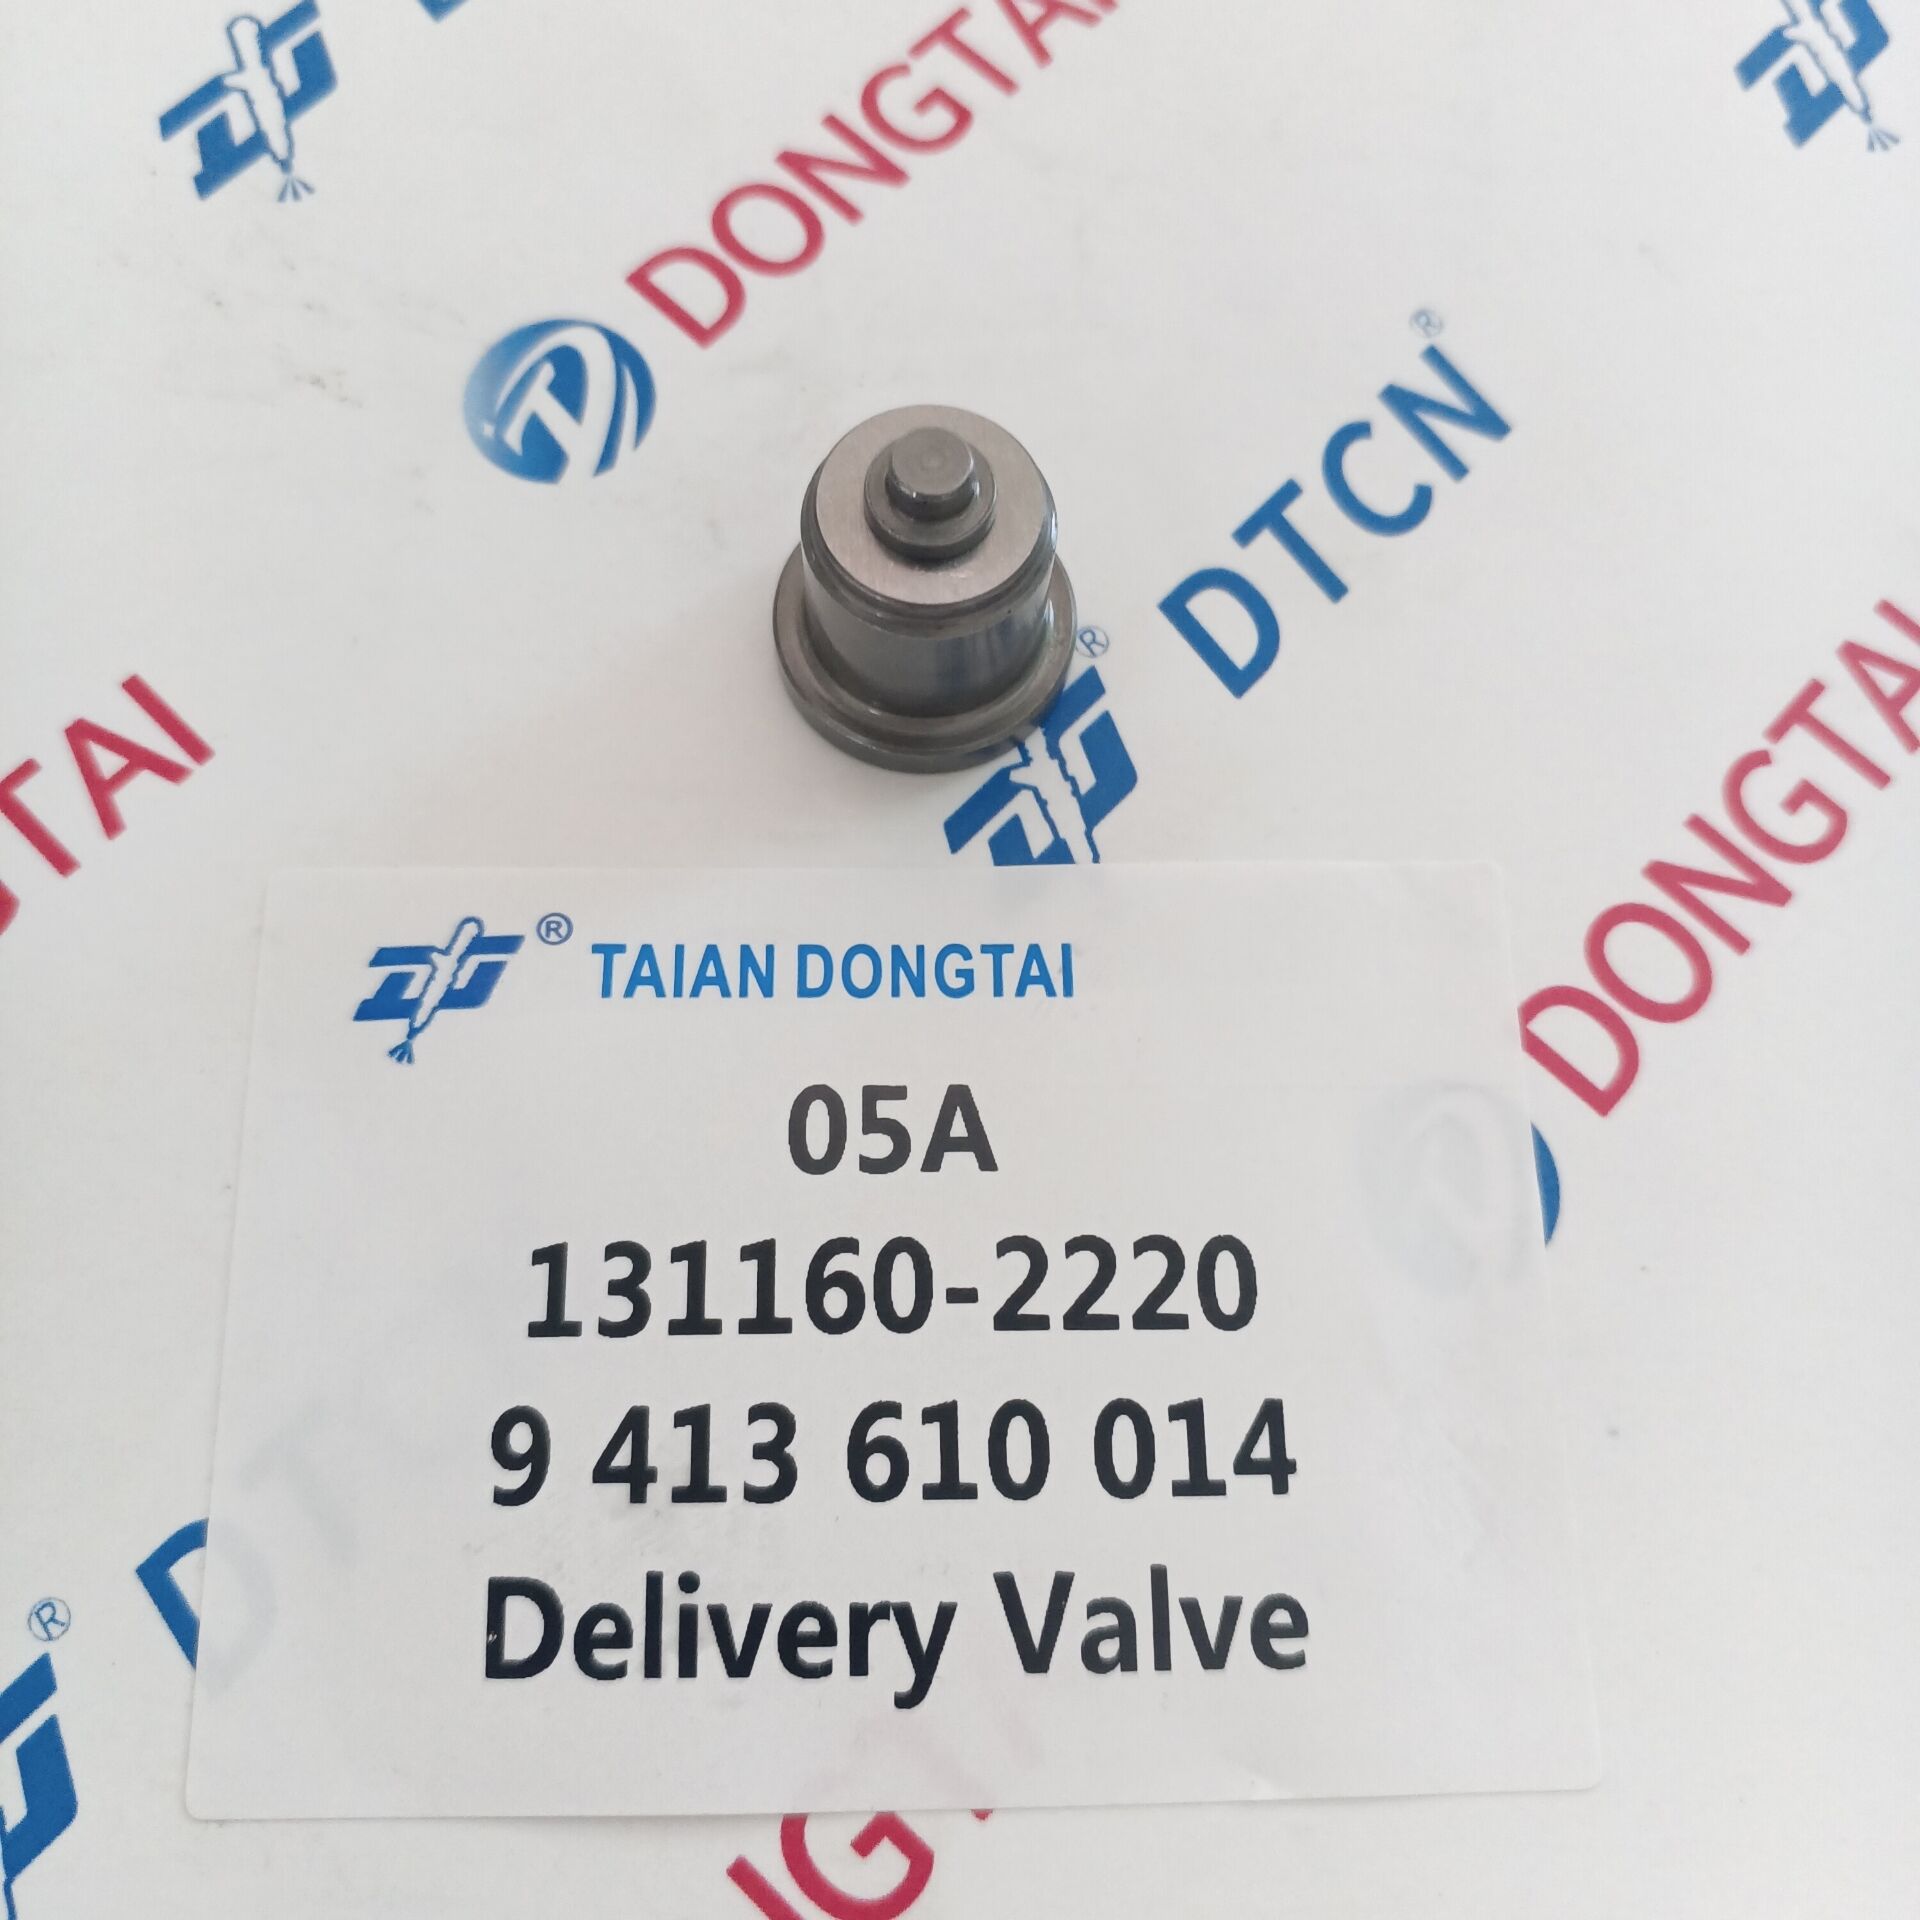 Delivery Valve 131160-2220, 9 413 610 014, 05A